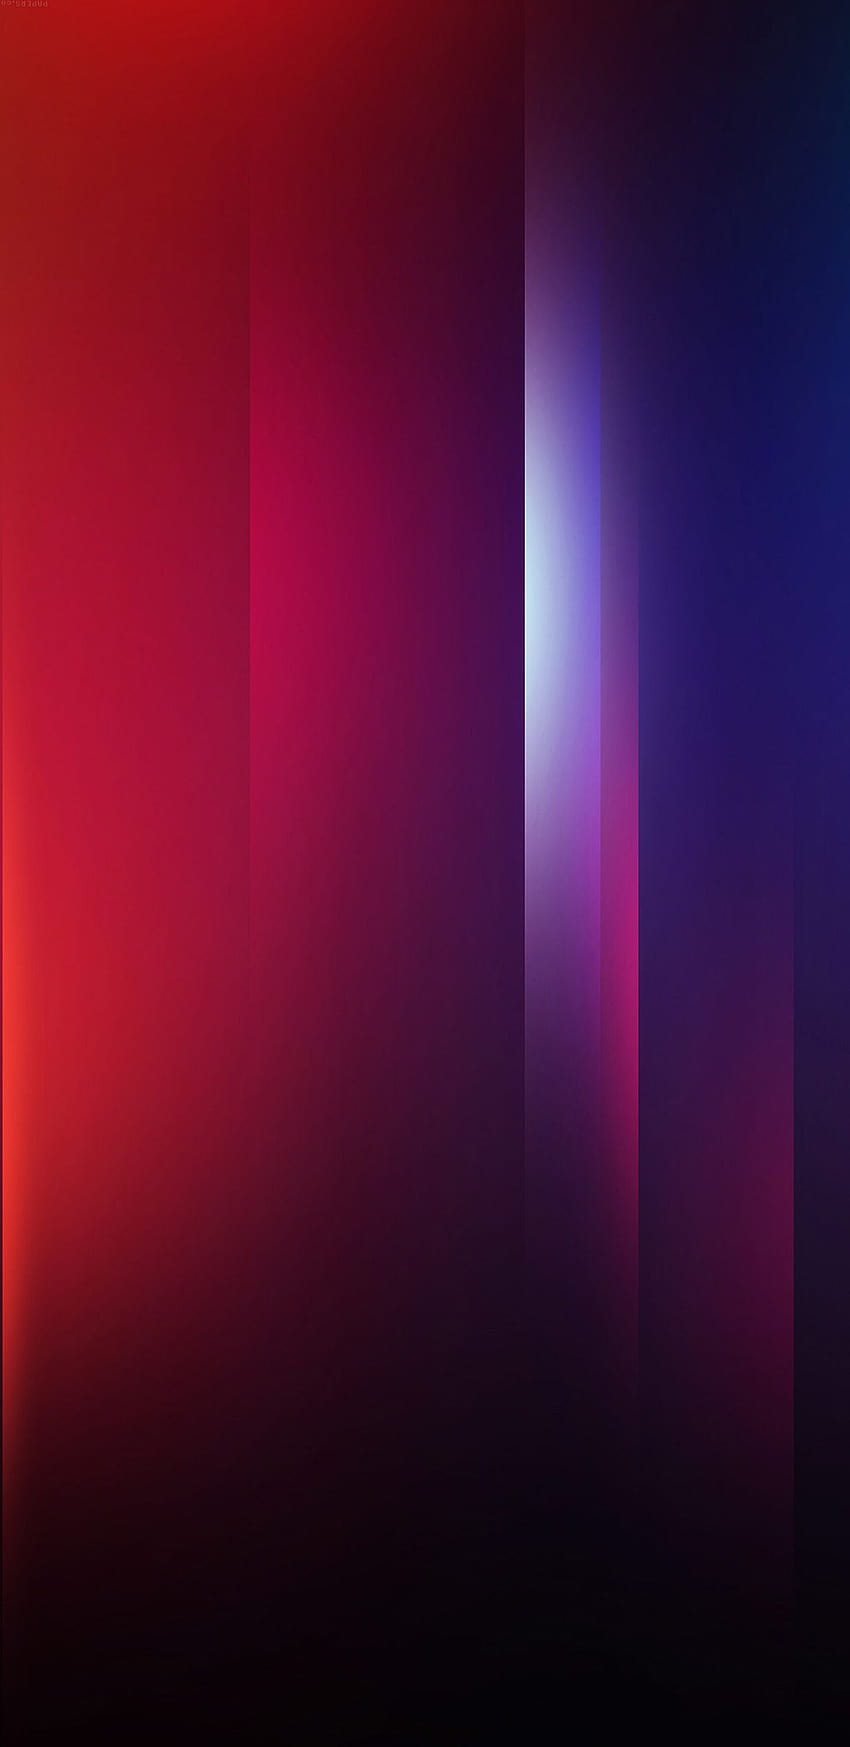 Blue, red, purple, minimal, abstract, galaxy, clean, beauty, colour, minimal, s8, Samsung HD phone wallpaper